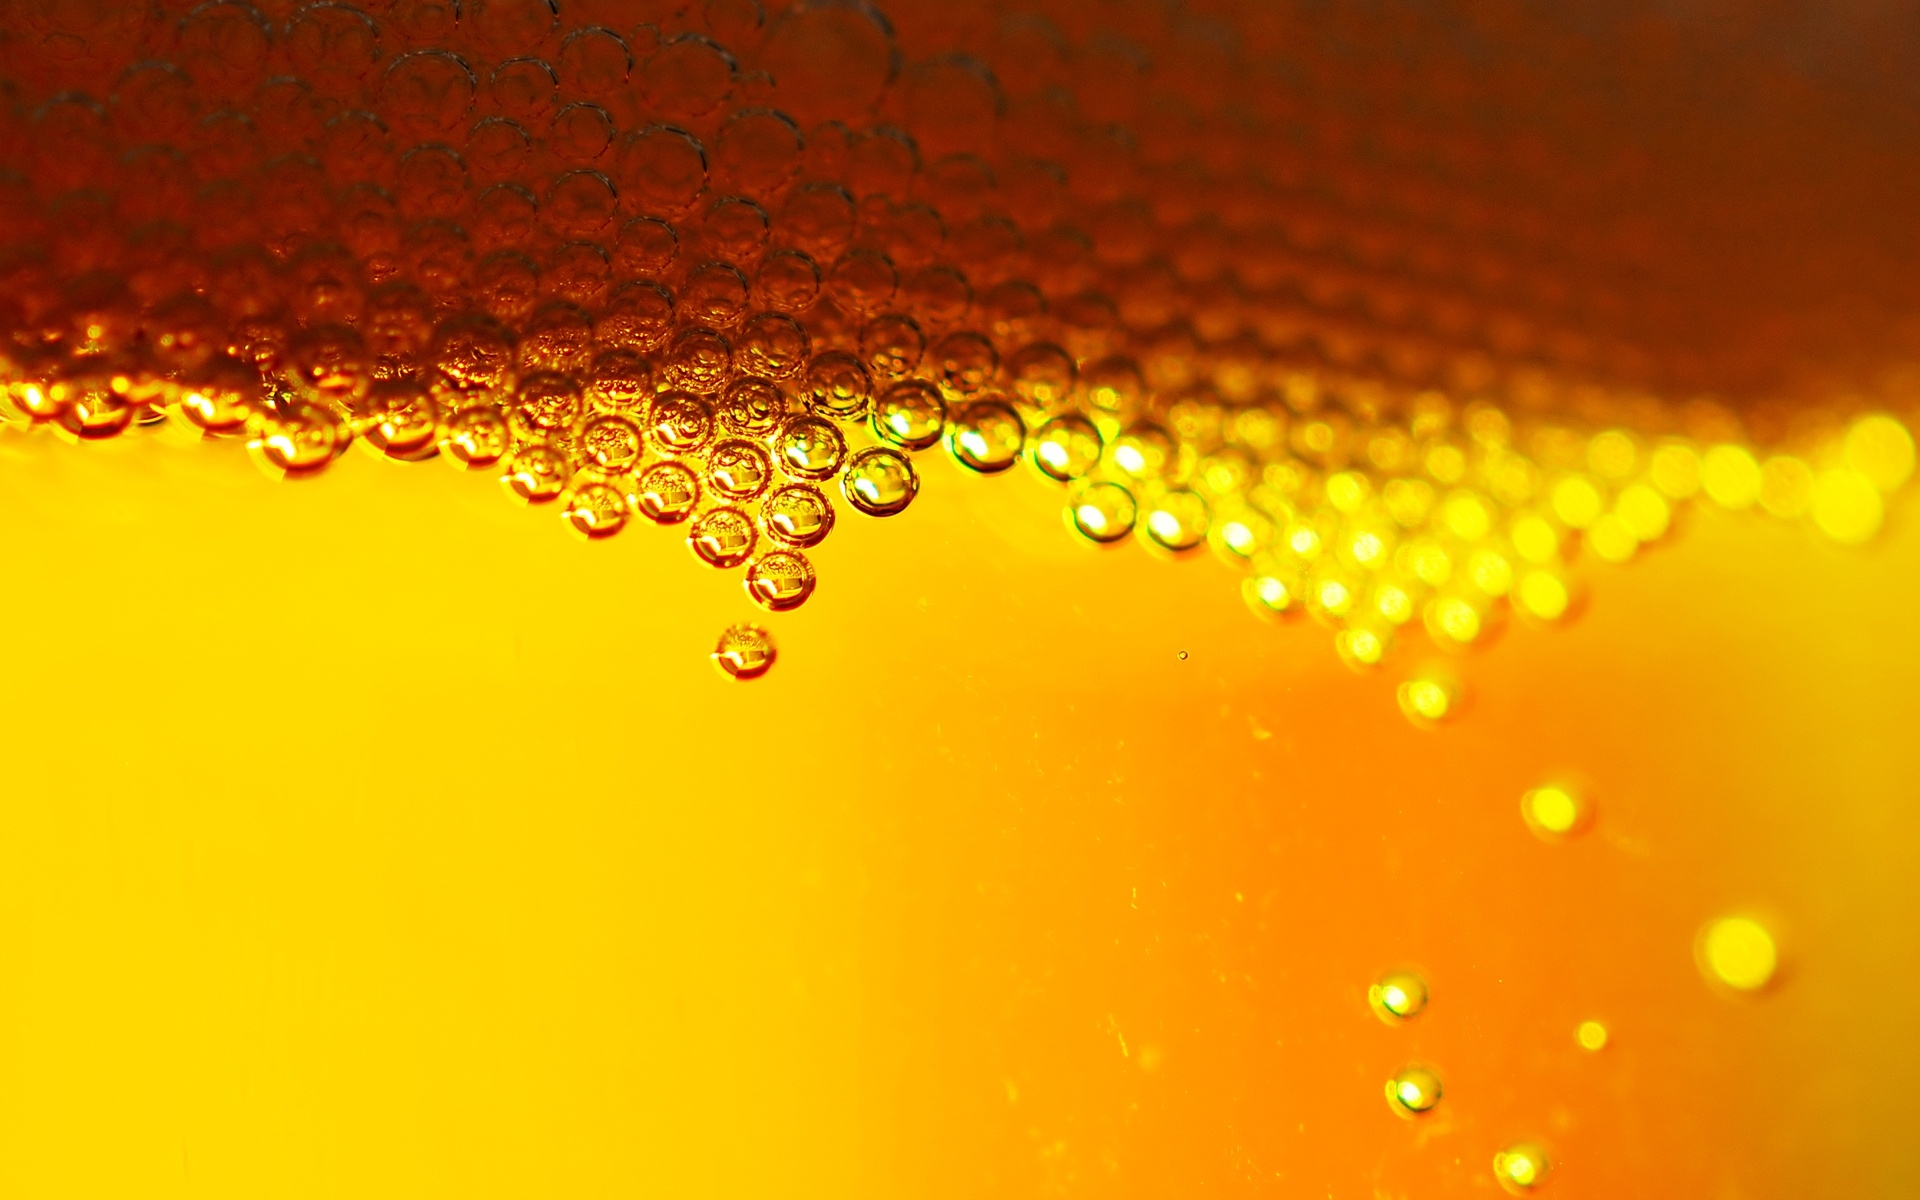 Beer Bubbles wallpapers Beer Bubbles stock photos